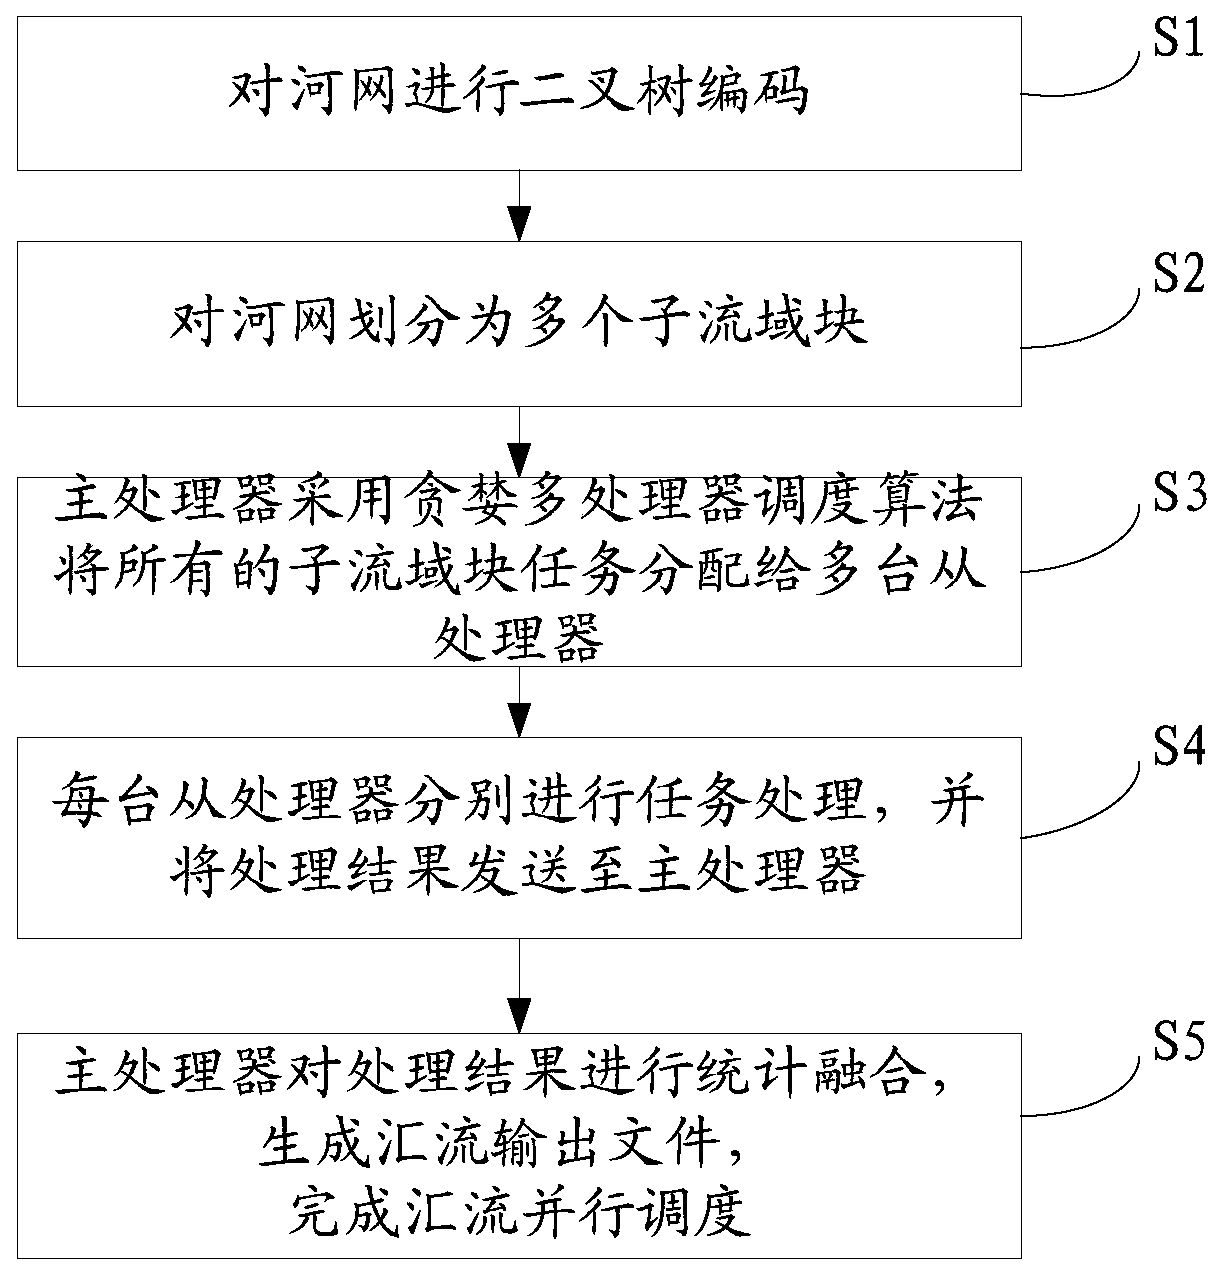 Confluence parallel scheduling method for distributed hydrological model